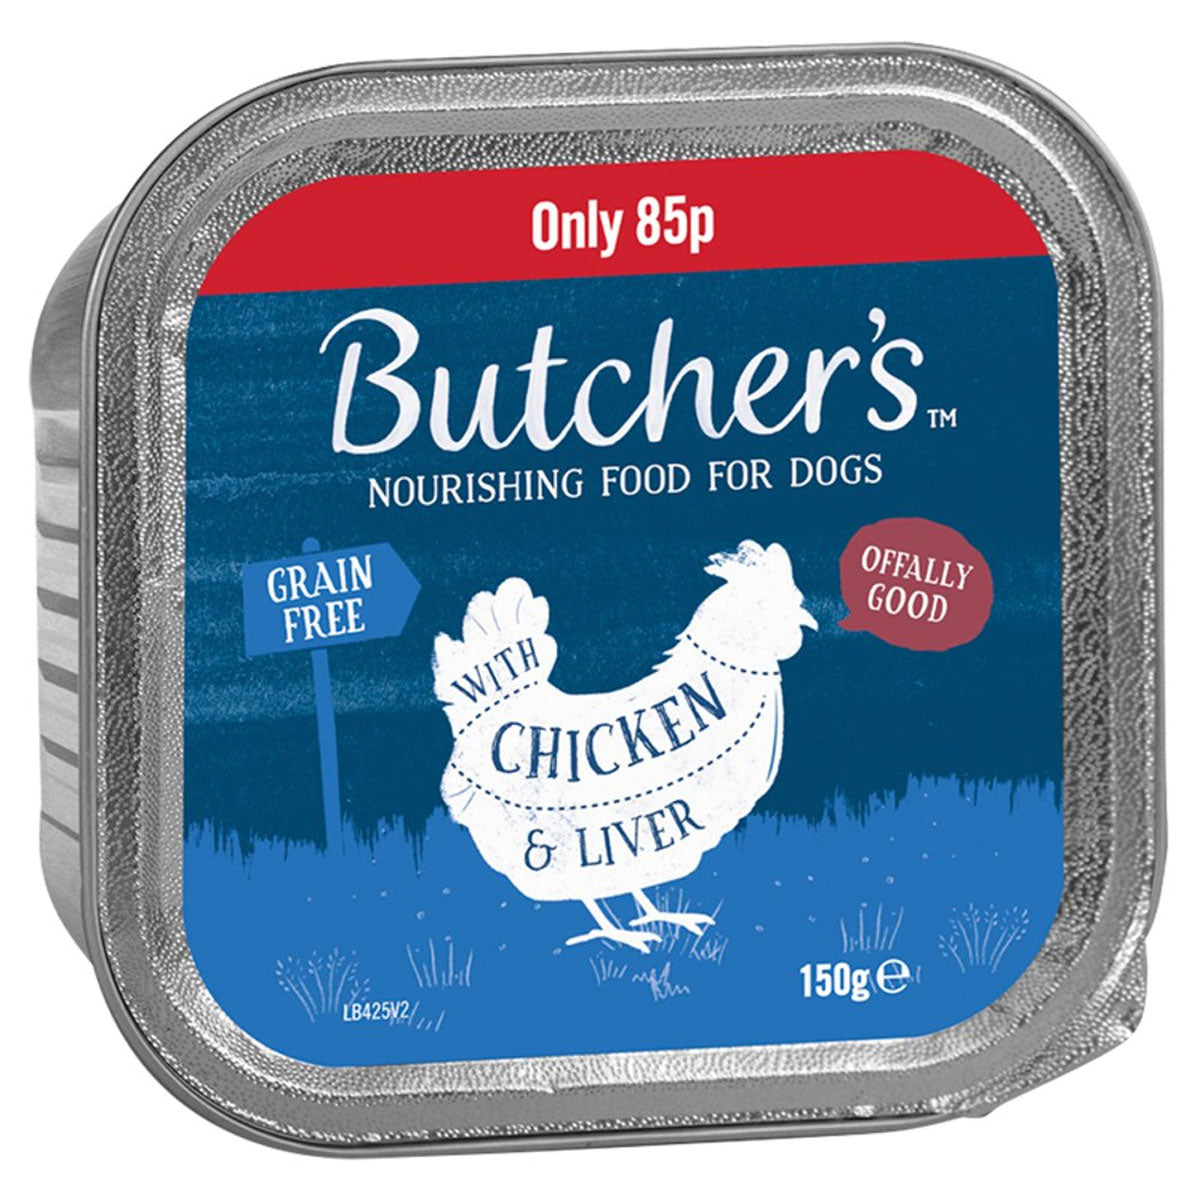 Butcher's - Chicken & Liver Dog Food Tray - 150g - Continental Food Store